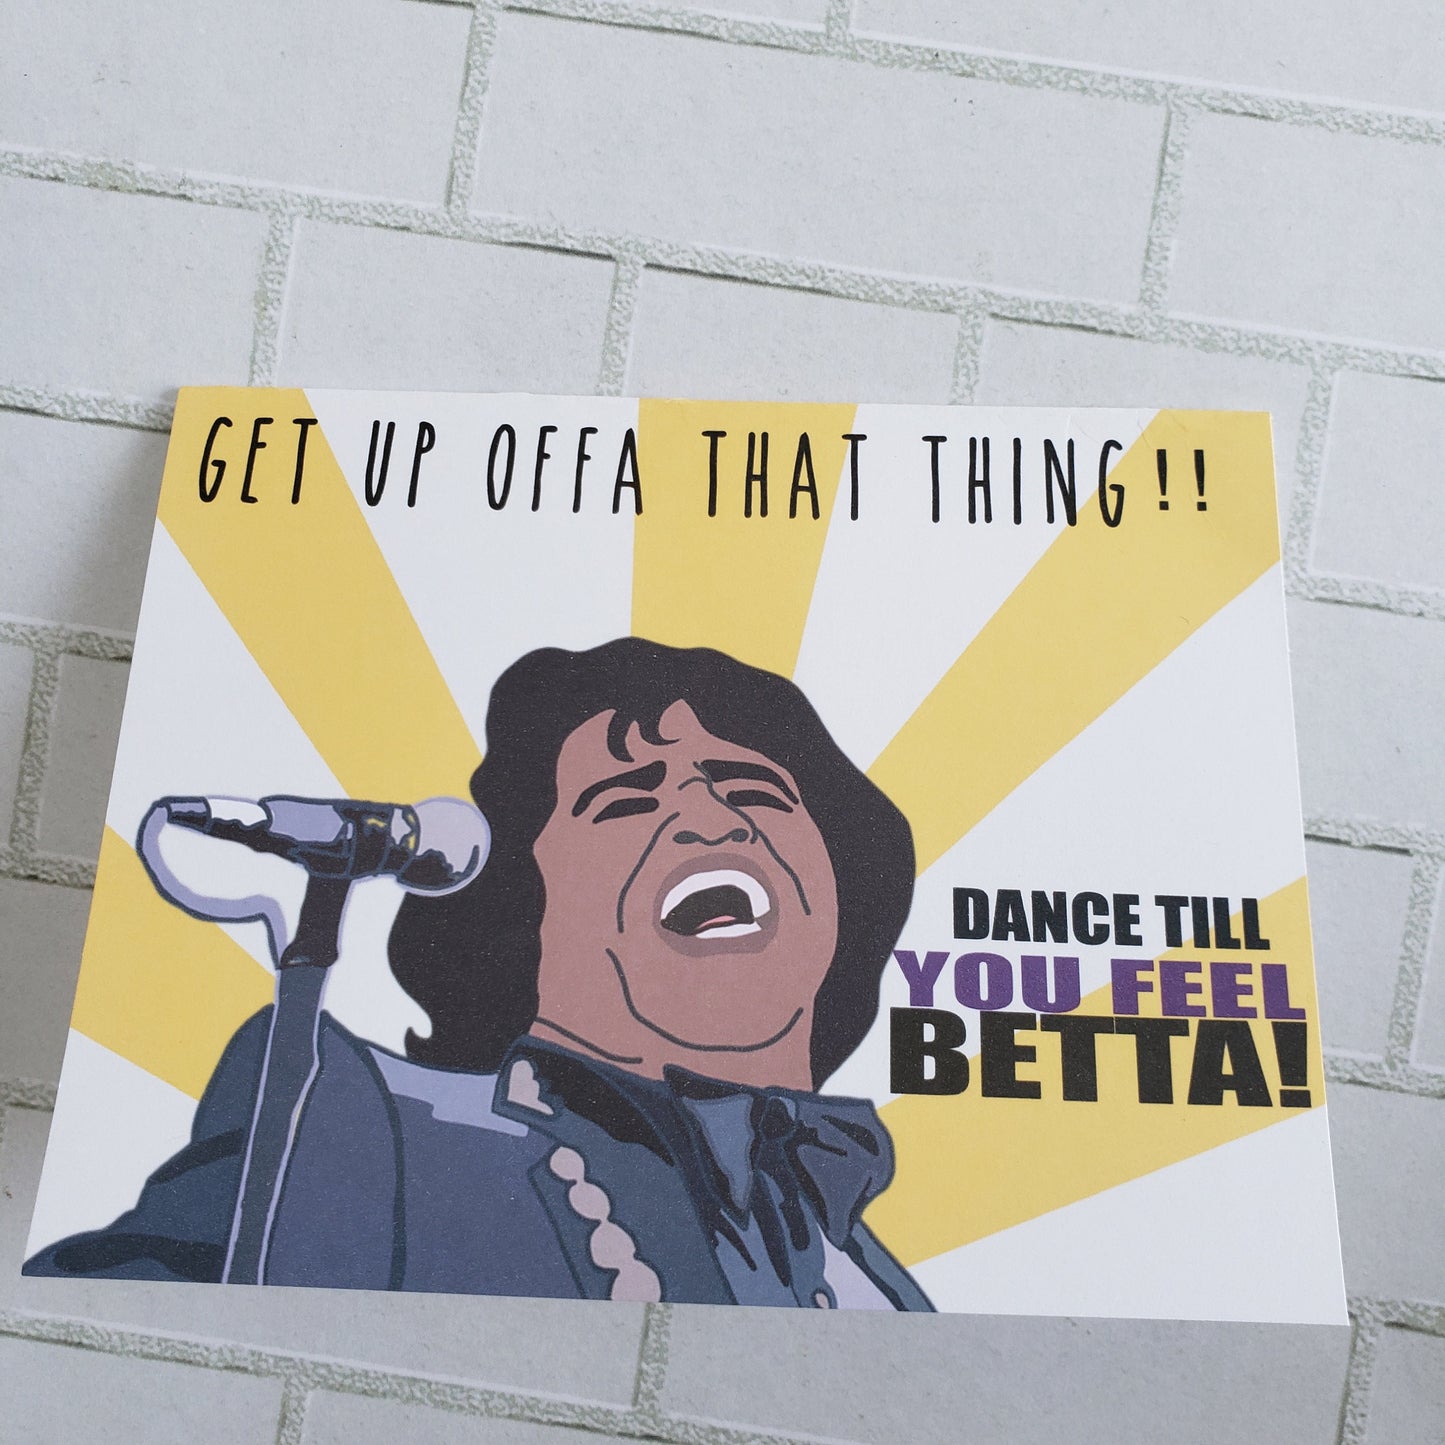 Funny Get Well Card, Encouragement Card, James Brown, Get Up Offa That Thing, Funny Card, Hand Drawn Print